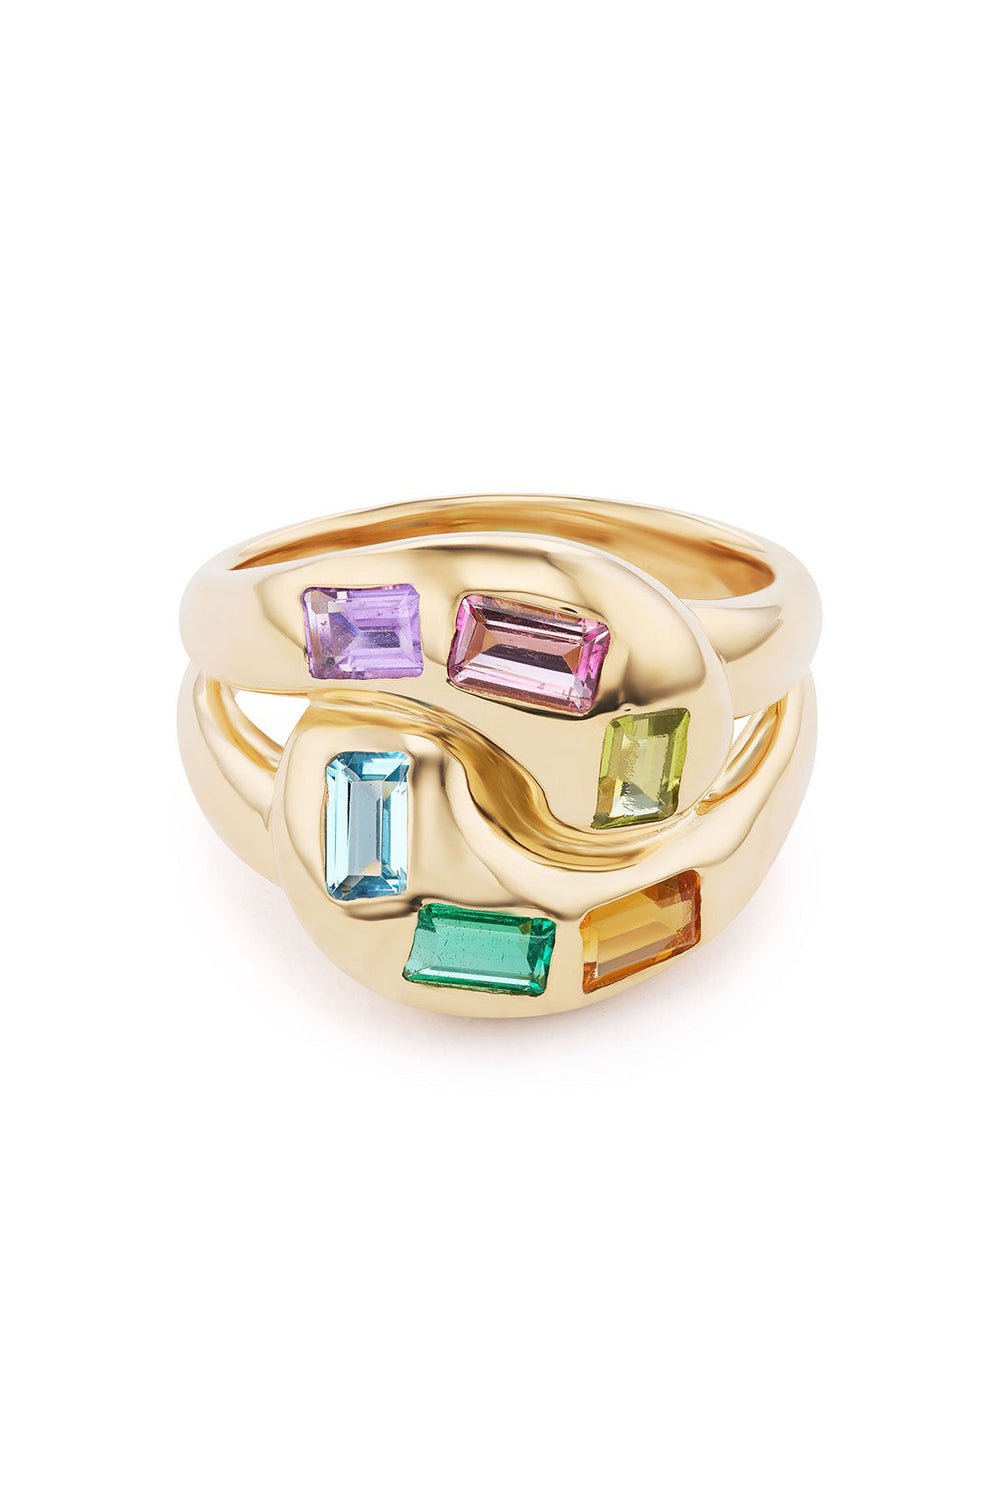 BRENT NEALE-Multi Colored Knot Ring-YELLOW GOLD